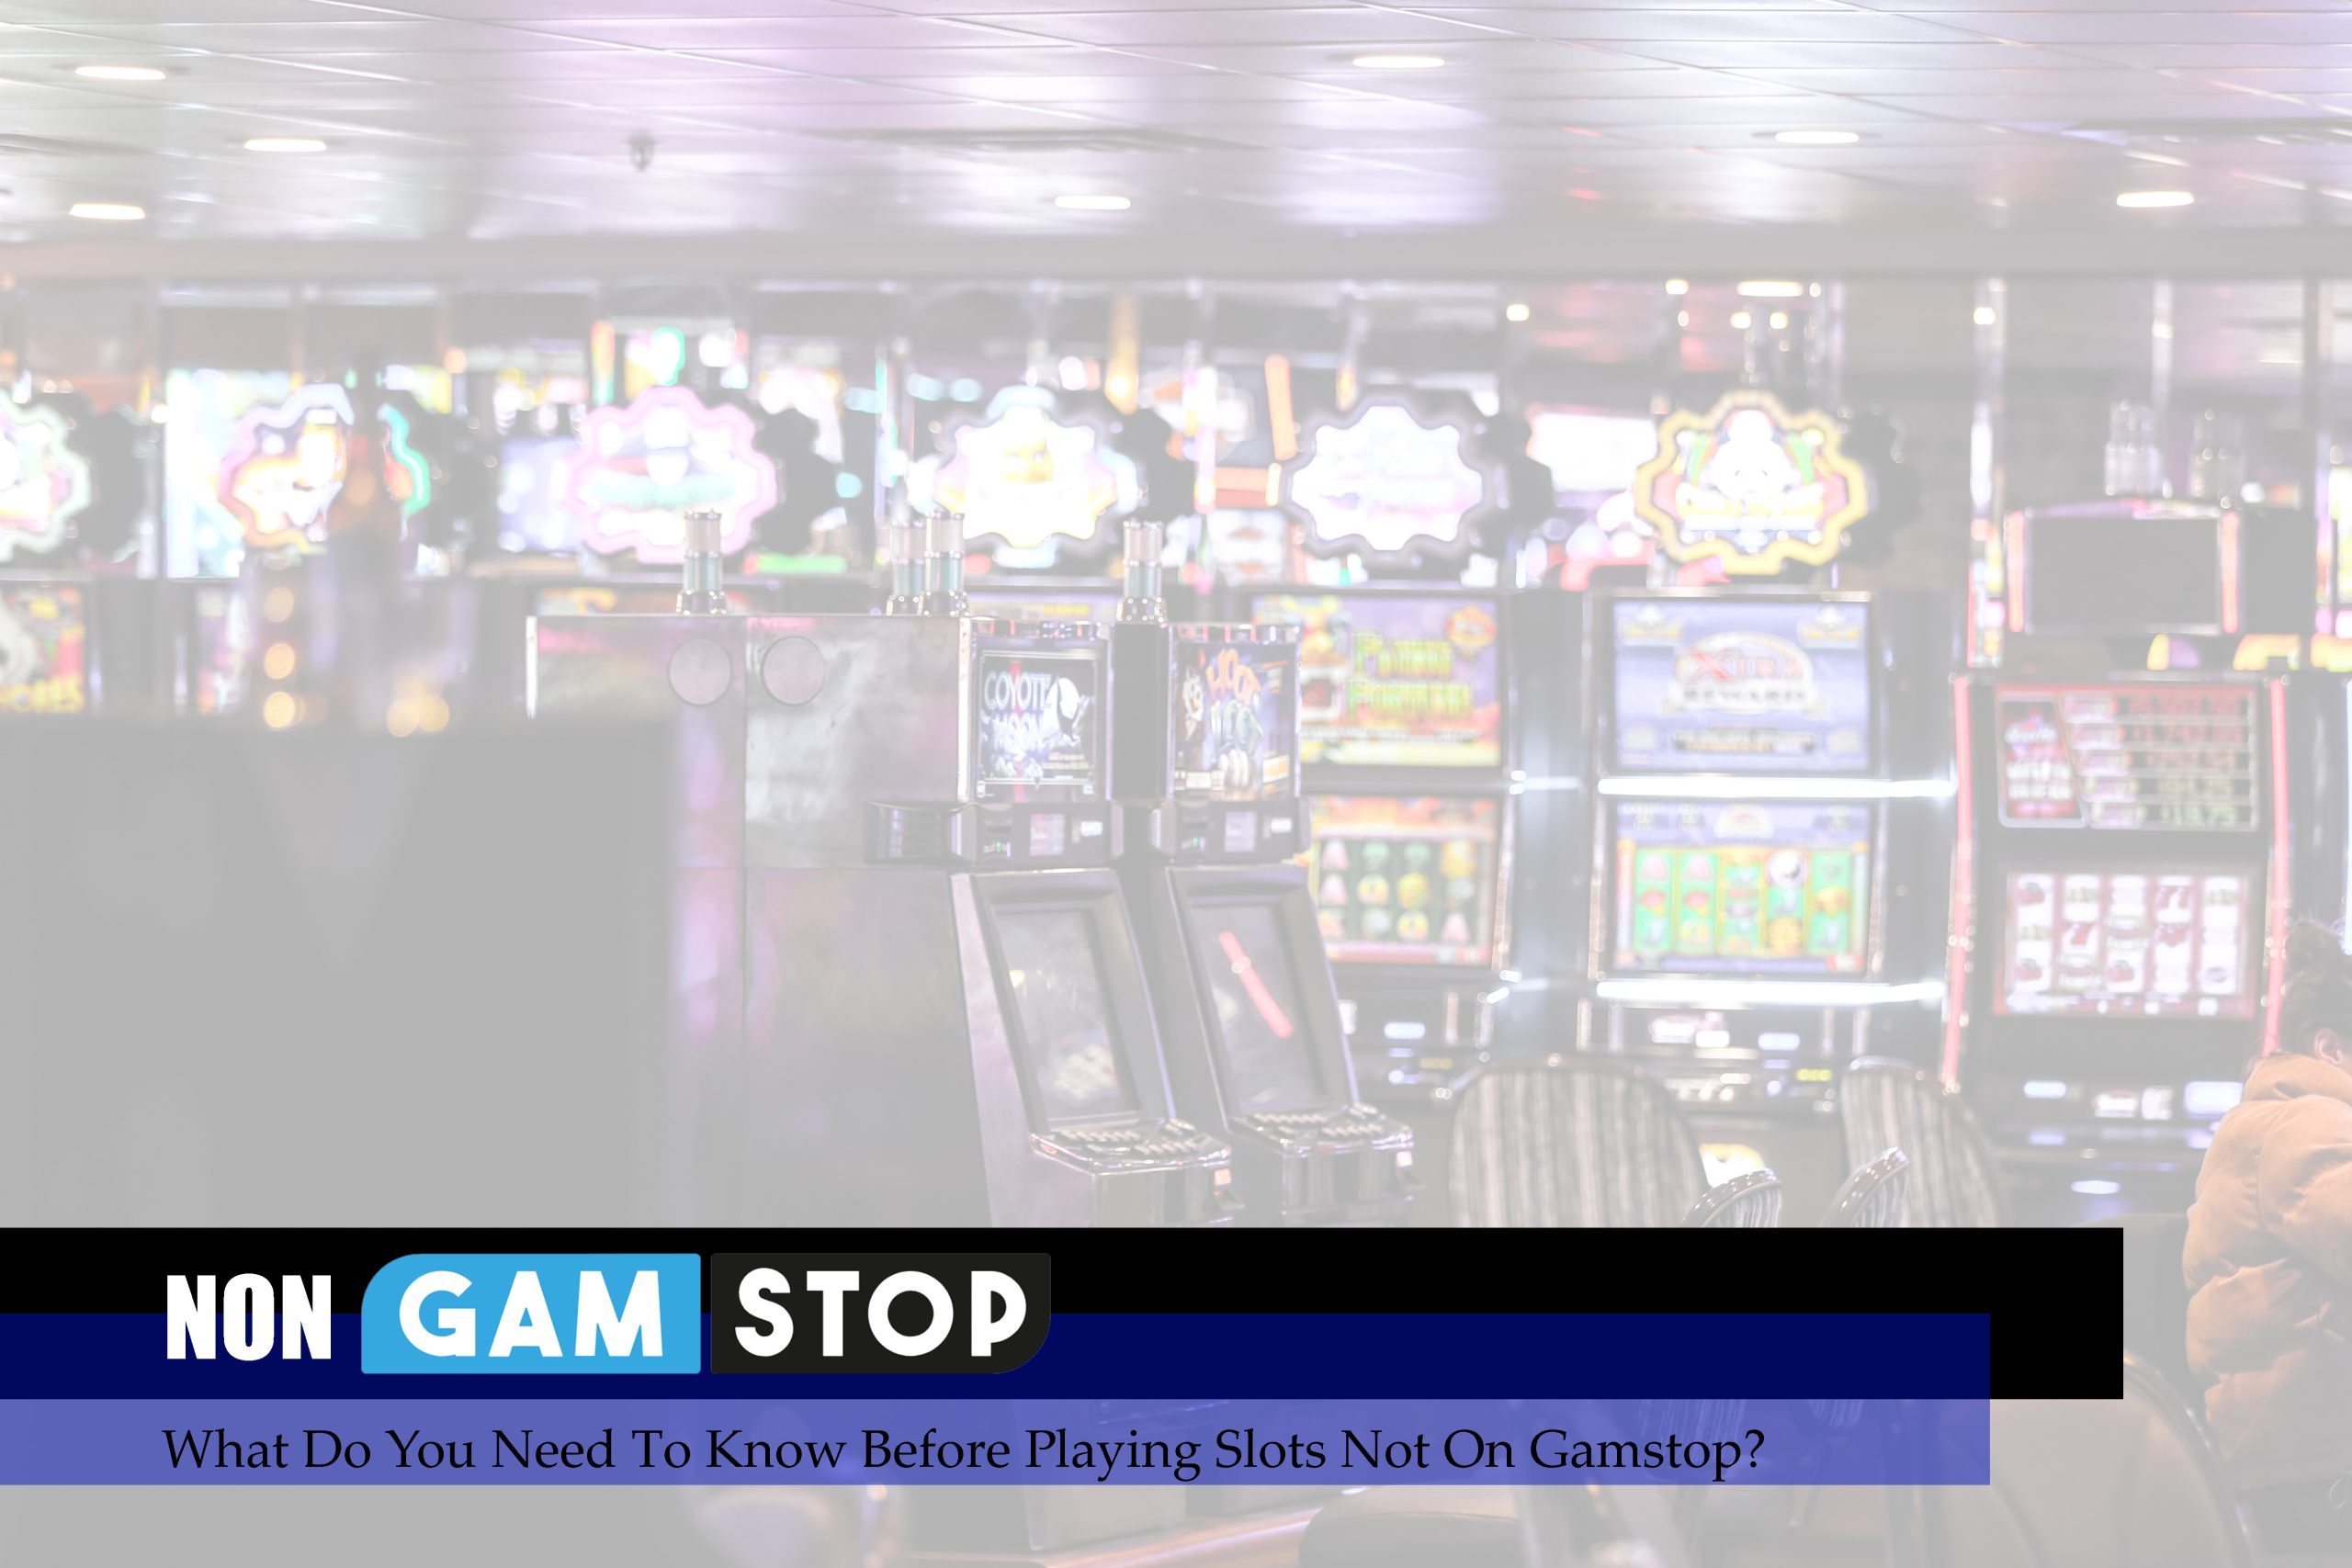 What Do You Need To Know Before Playing Slots Not On Gamstop?